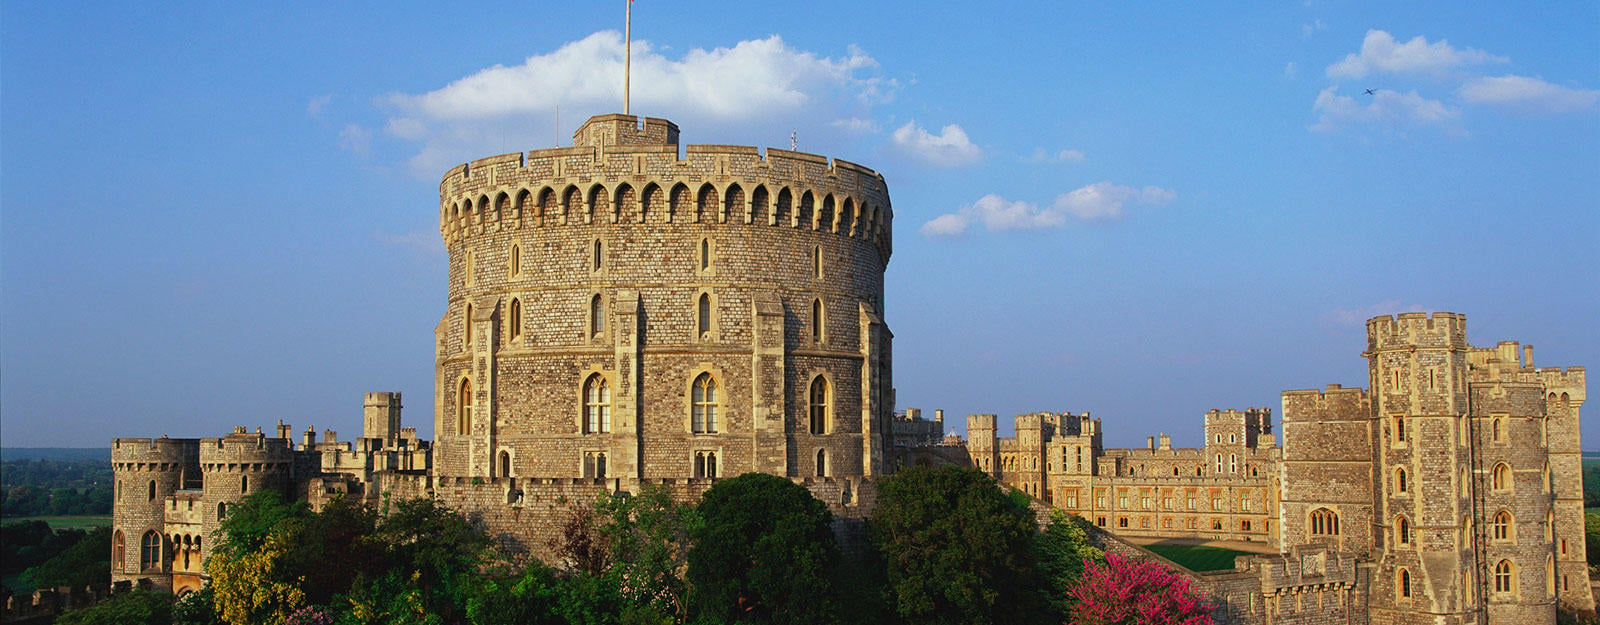 17-extraordinary-facts-about-windsor-castle